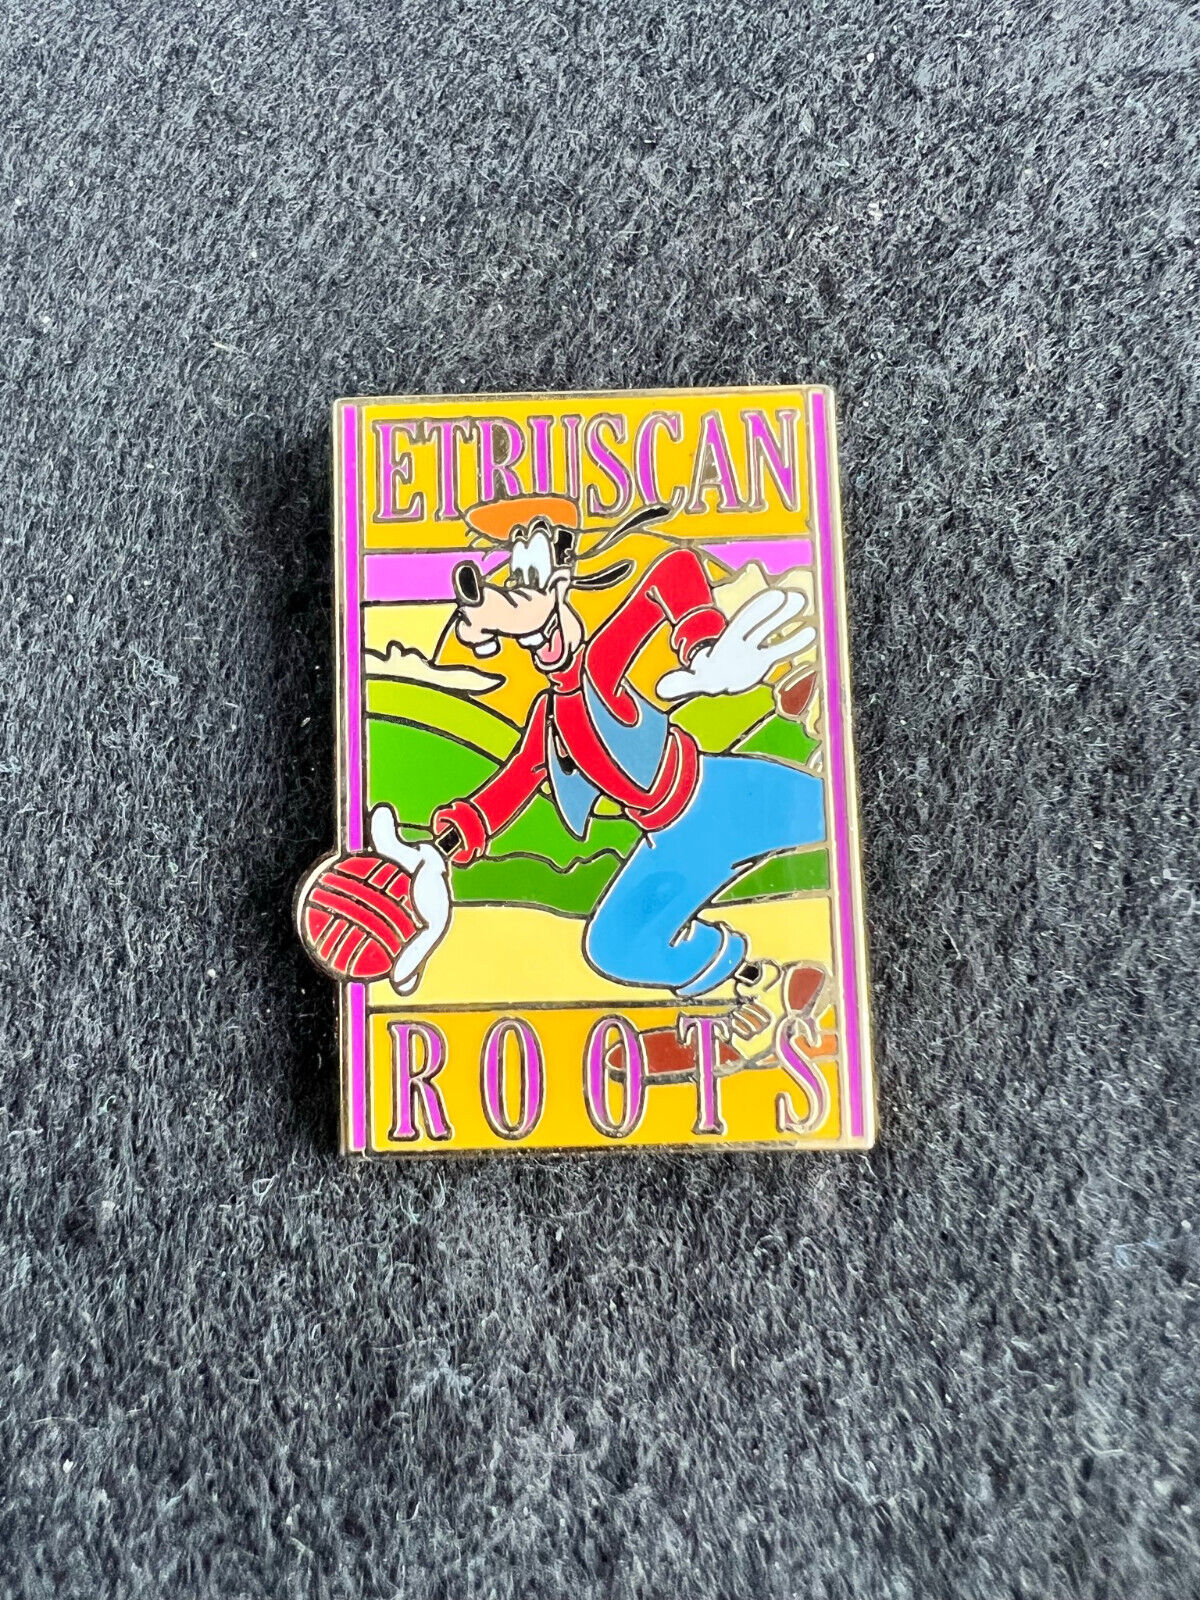 Adventures by Disney ABD Etruscan Roots Goofy Bocce Ball Gift Pin LE PP #56844